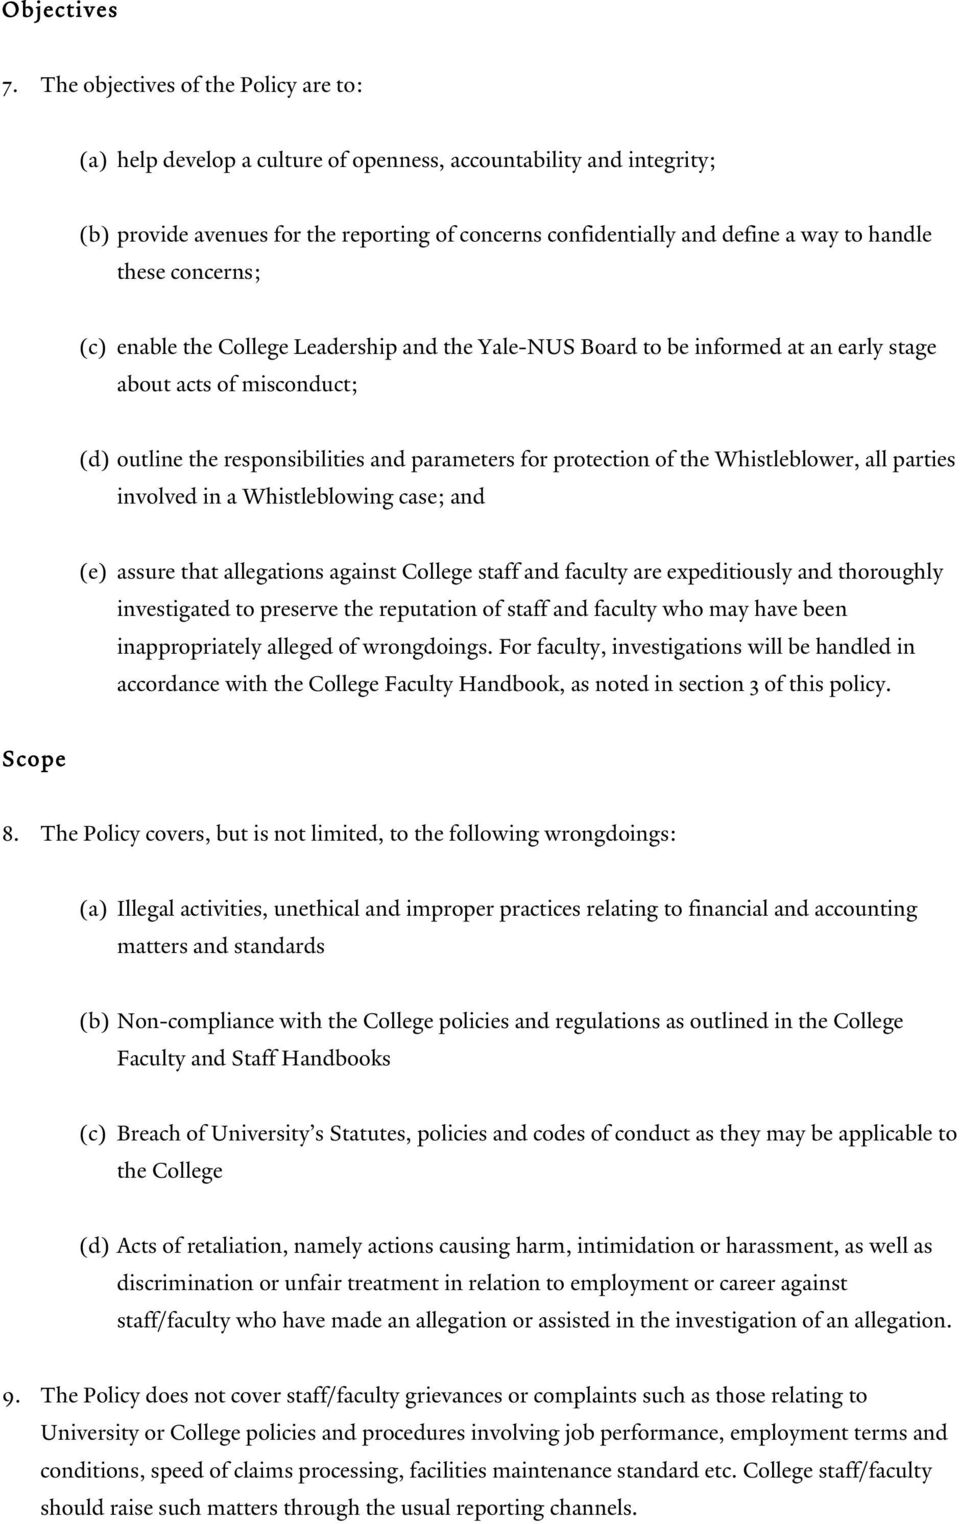 these concerns; (c) enable the College Leadership and the Yale-NUS Board to be informed at an early stage about acts of misconduct; (d) outline the responsibilities and parameters for protection of